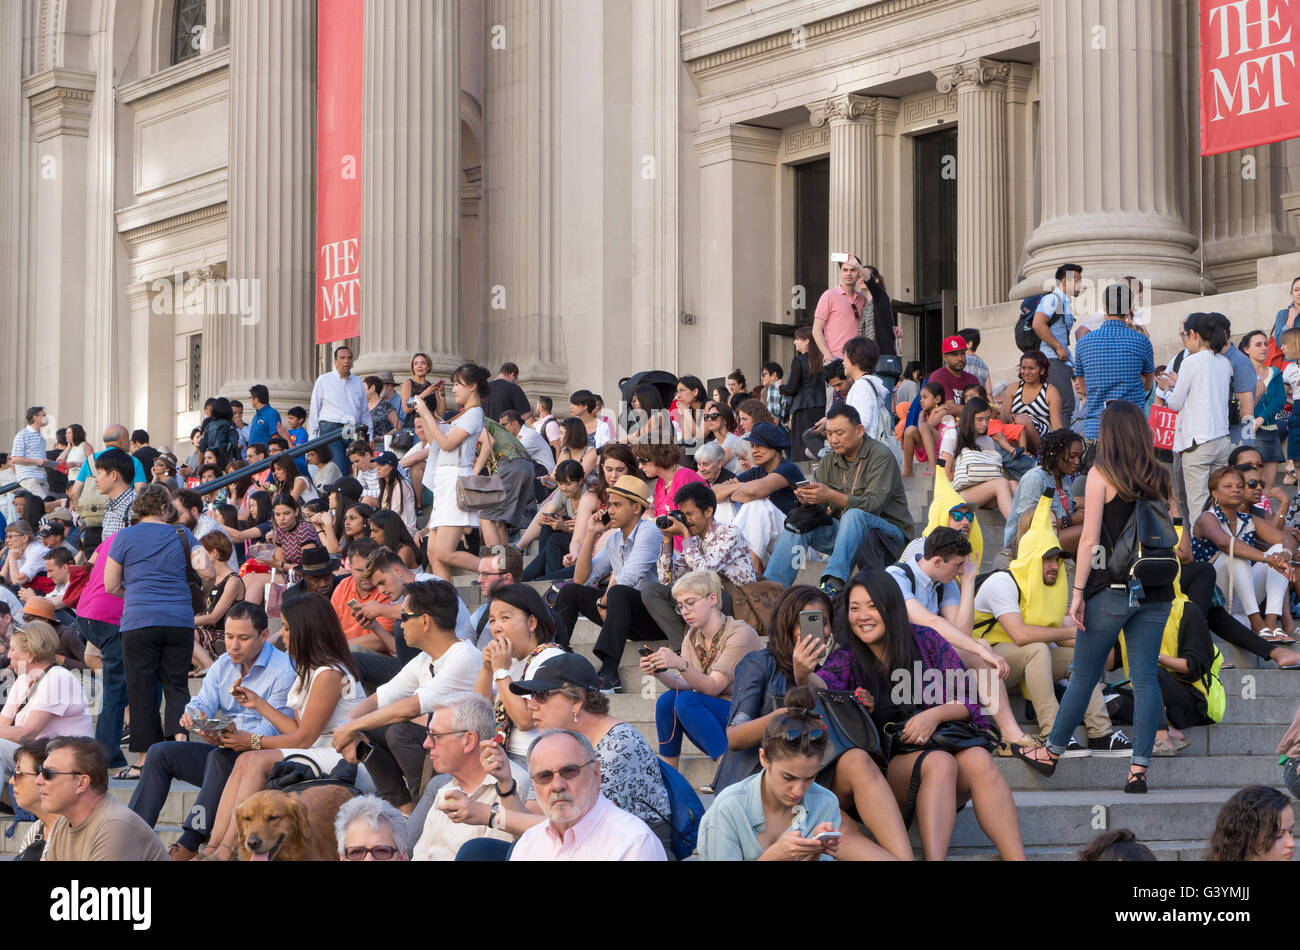 Crowd of people sitting on the steps of the Metropolitan Museum of Art, New York City. Stock Photo